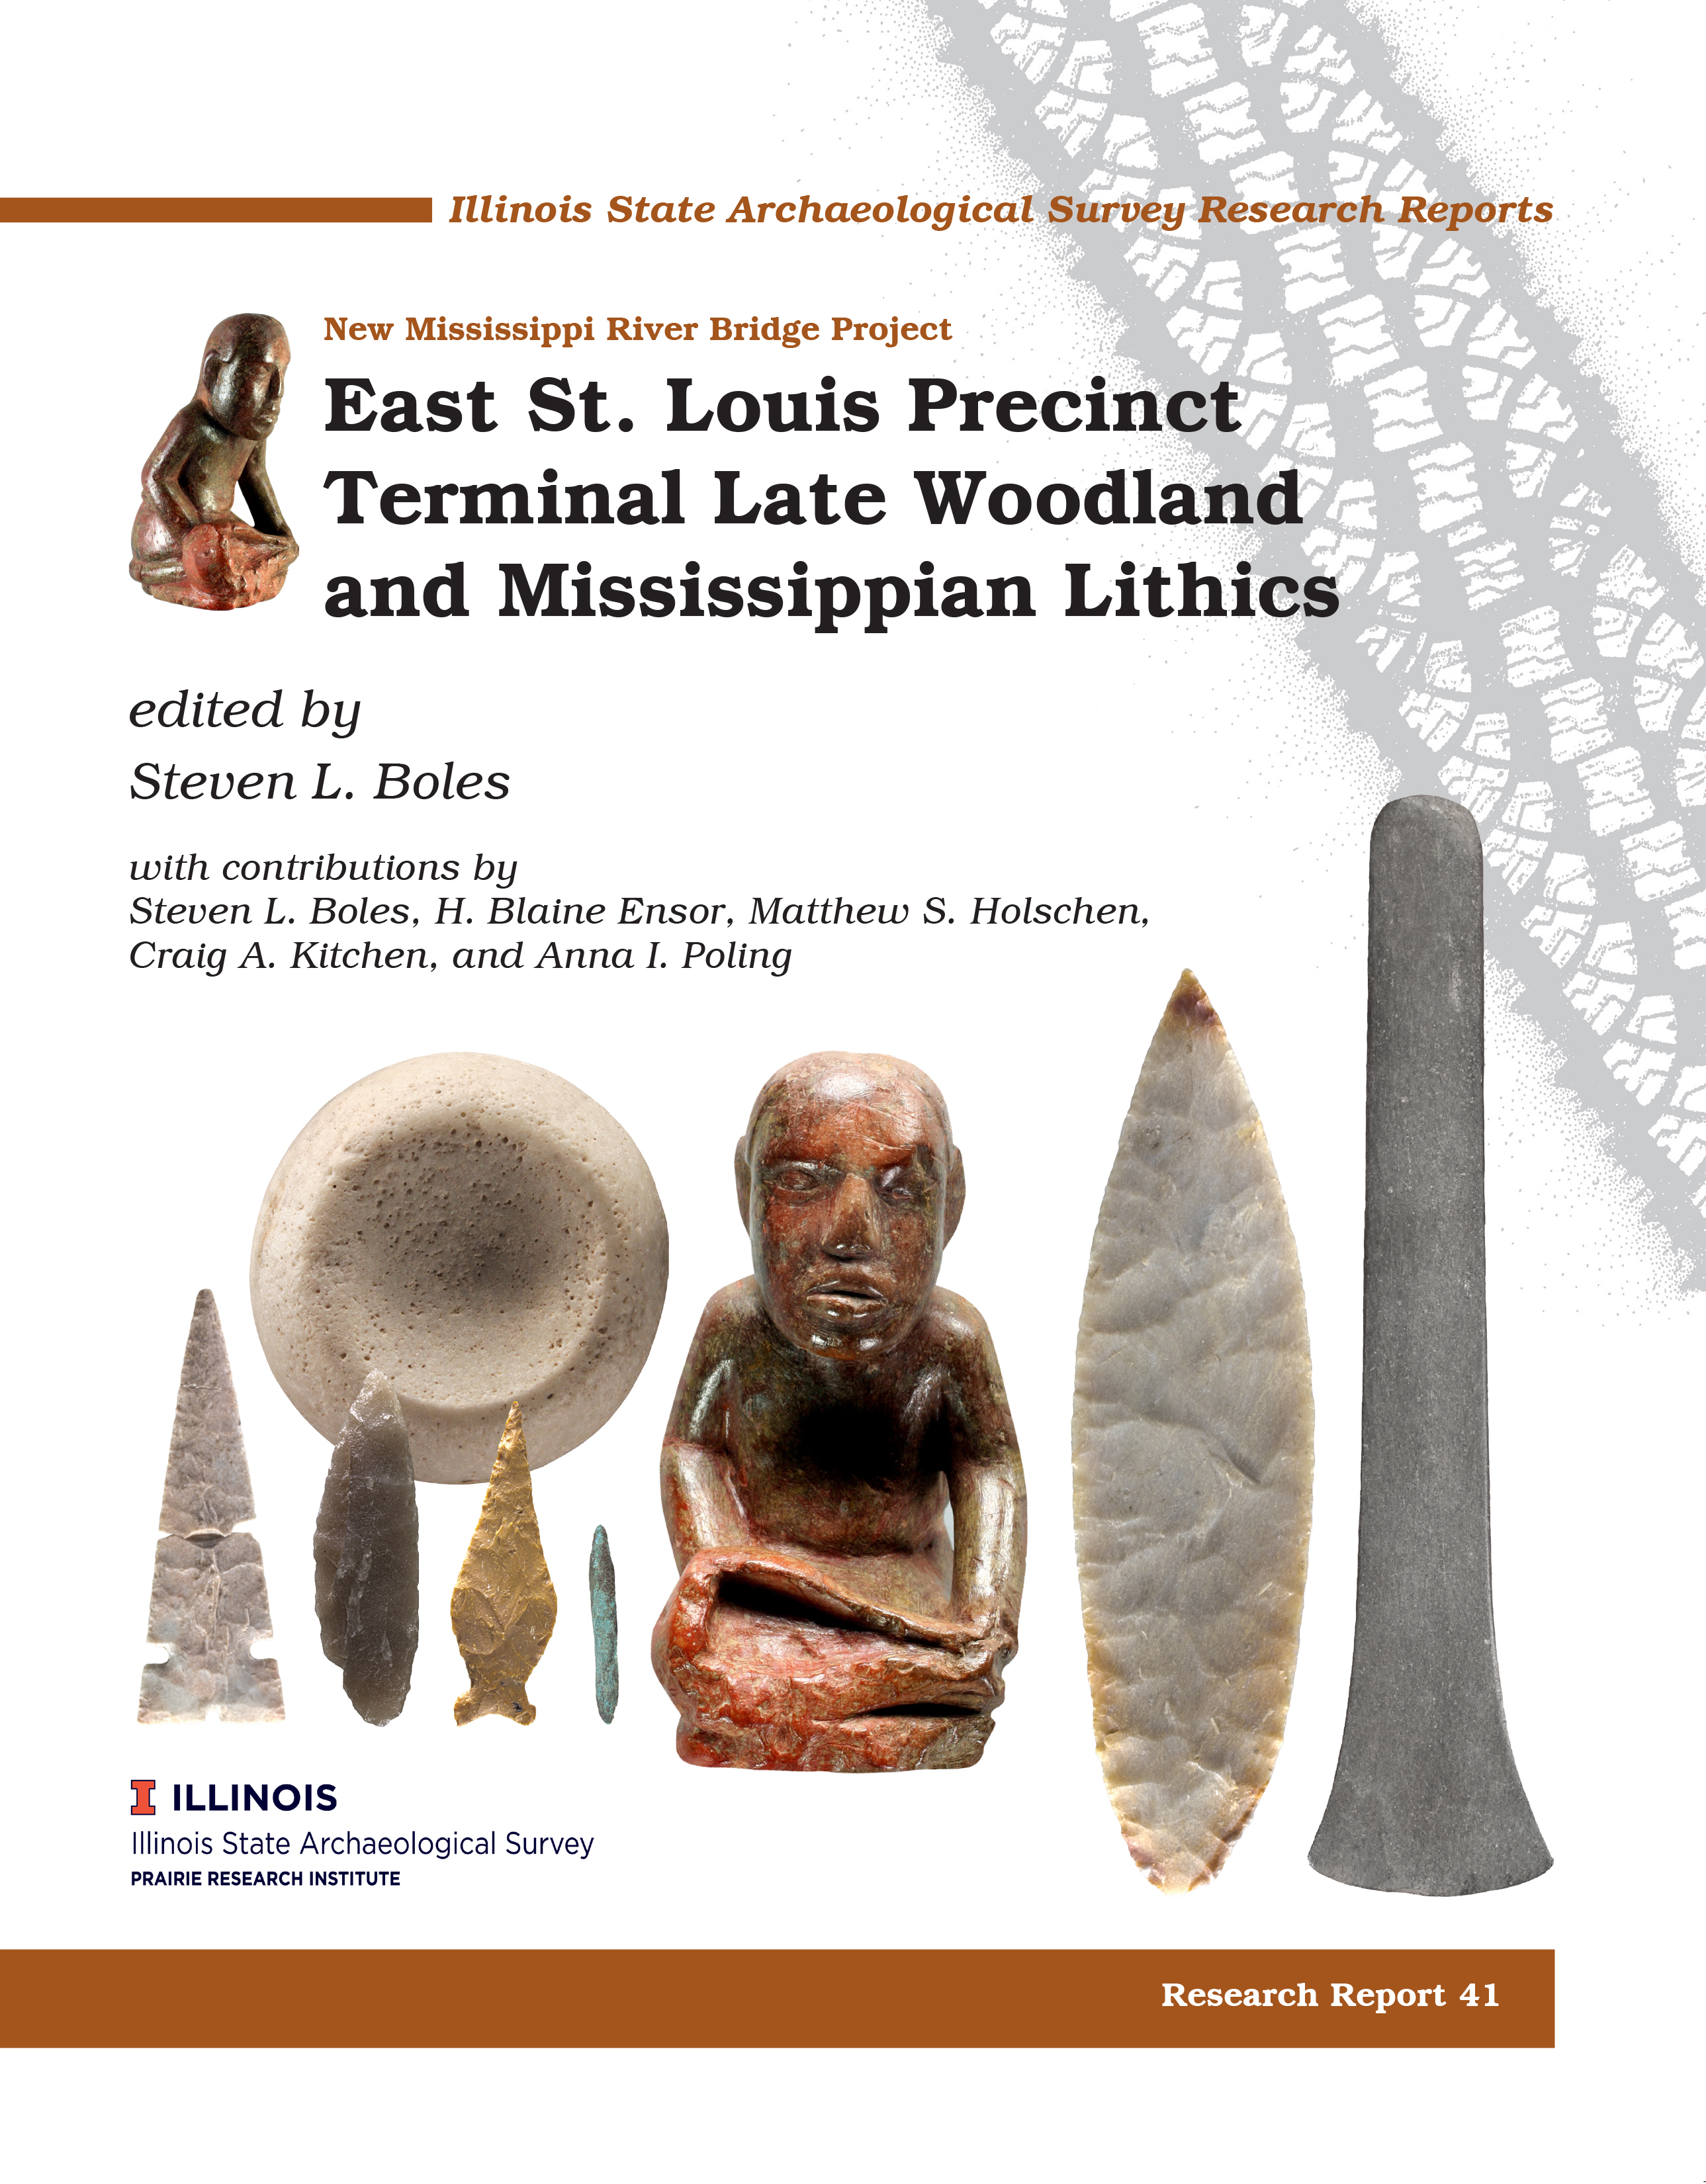 Research Report 41: East St. Louis Precinct Lithics